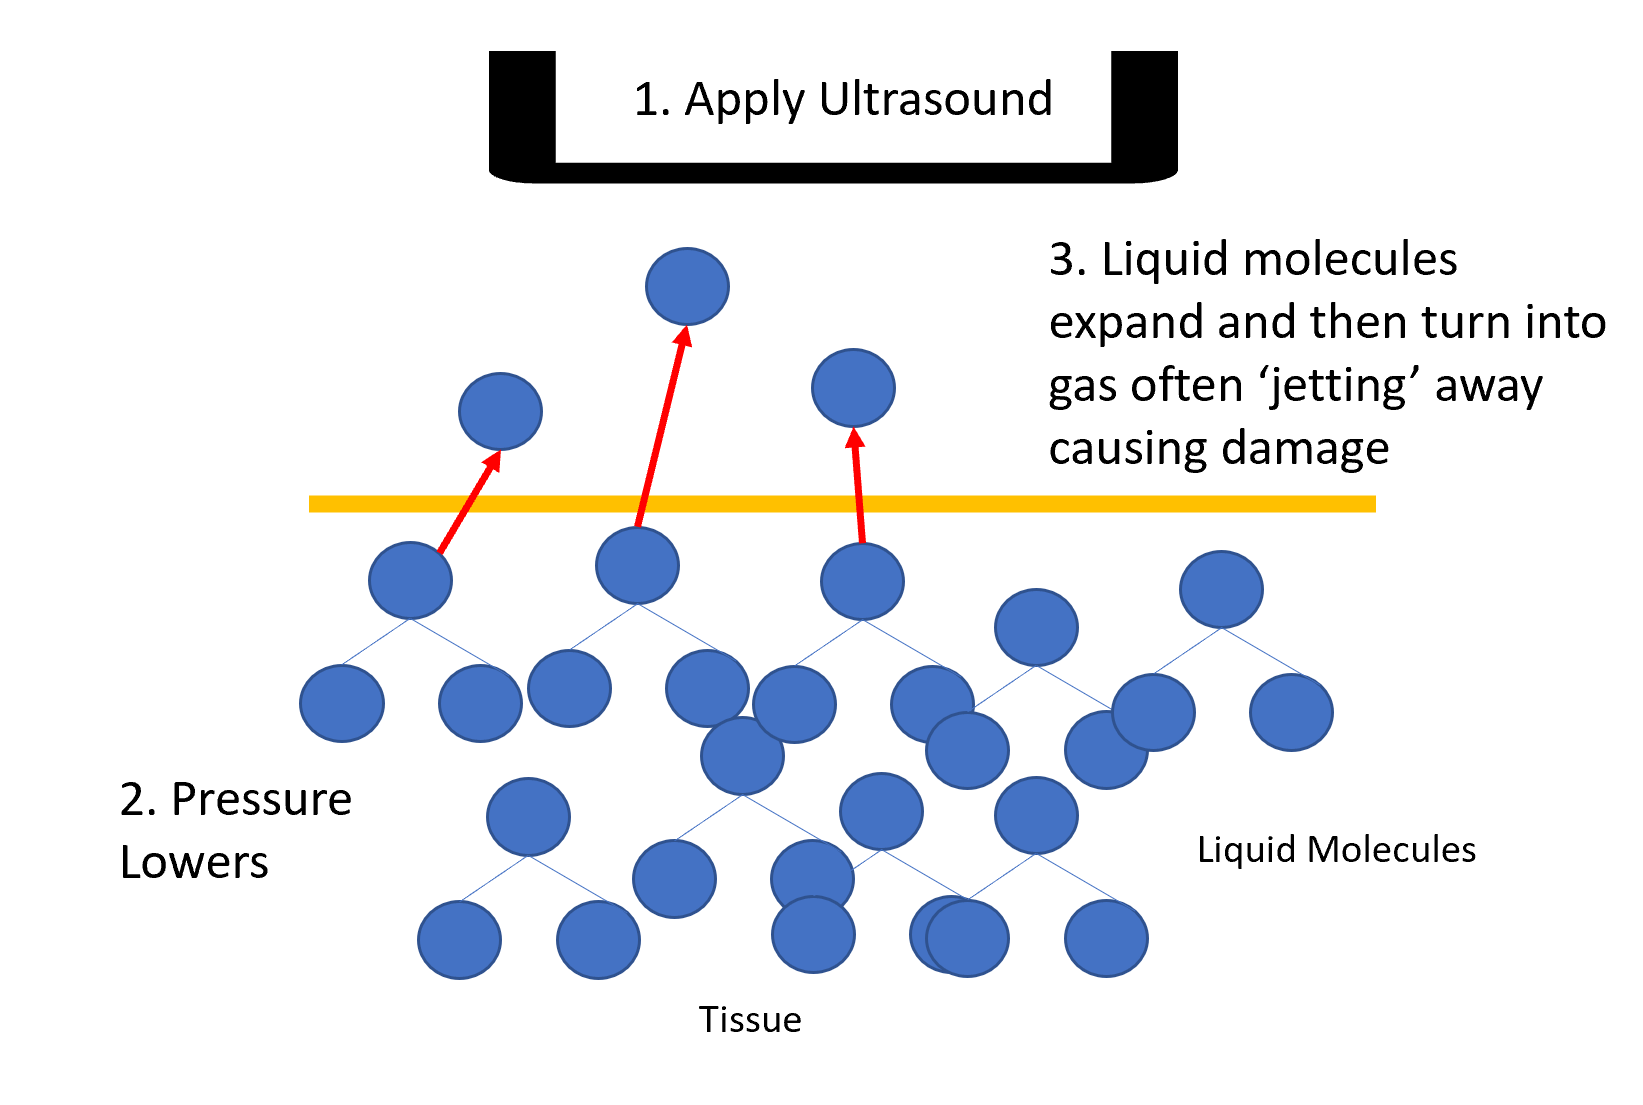 What Does Ultrasound Do?